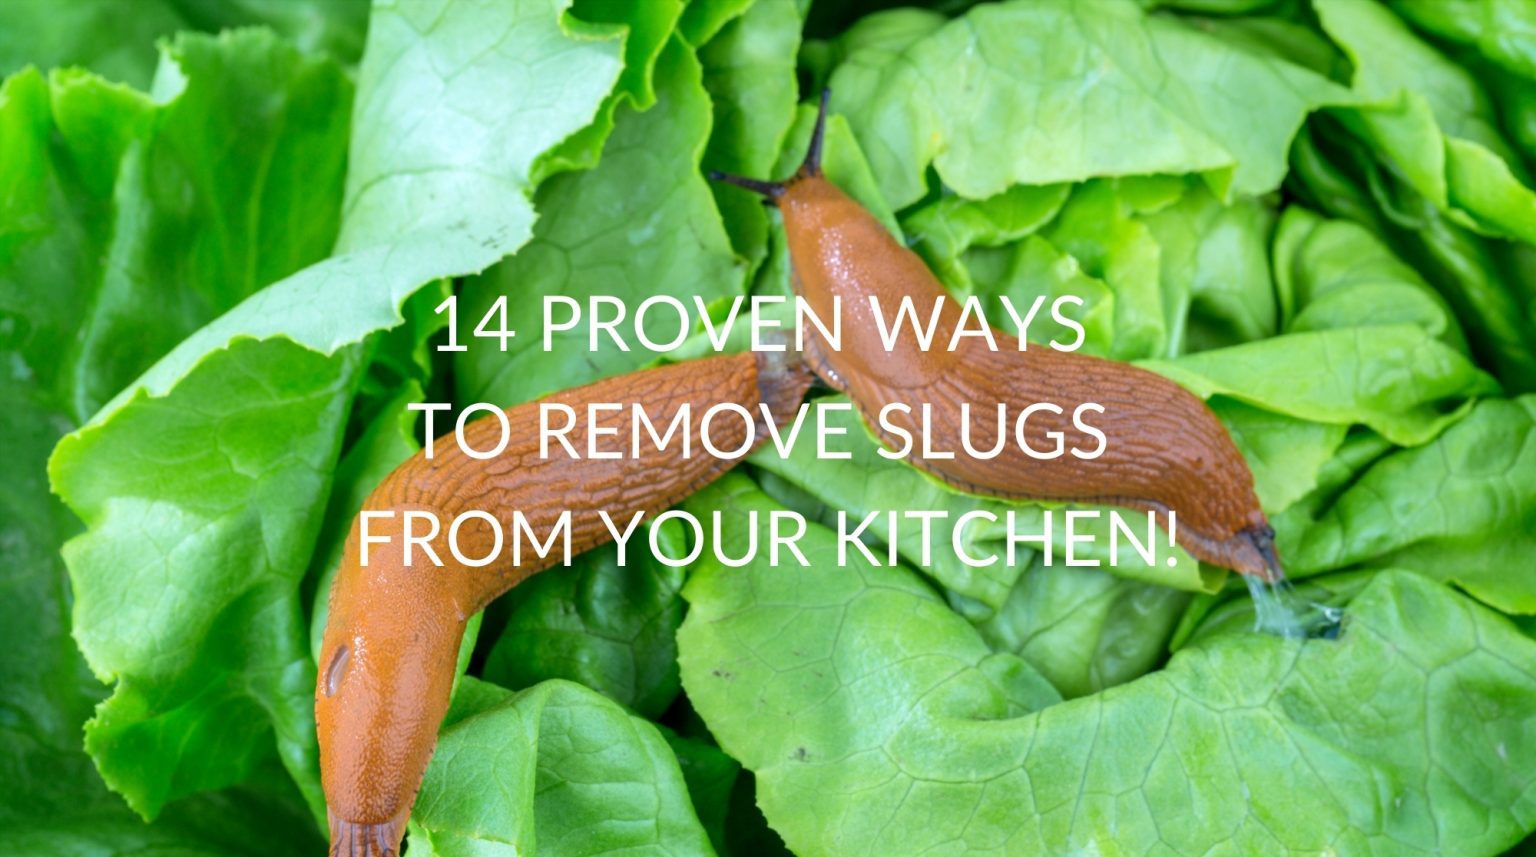 14 Proven Ways To Remove Slugs From Your Kitchen 1536x857 